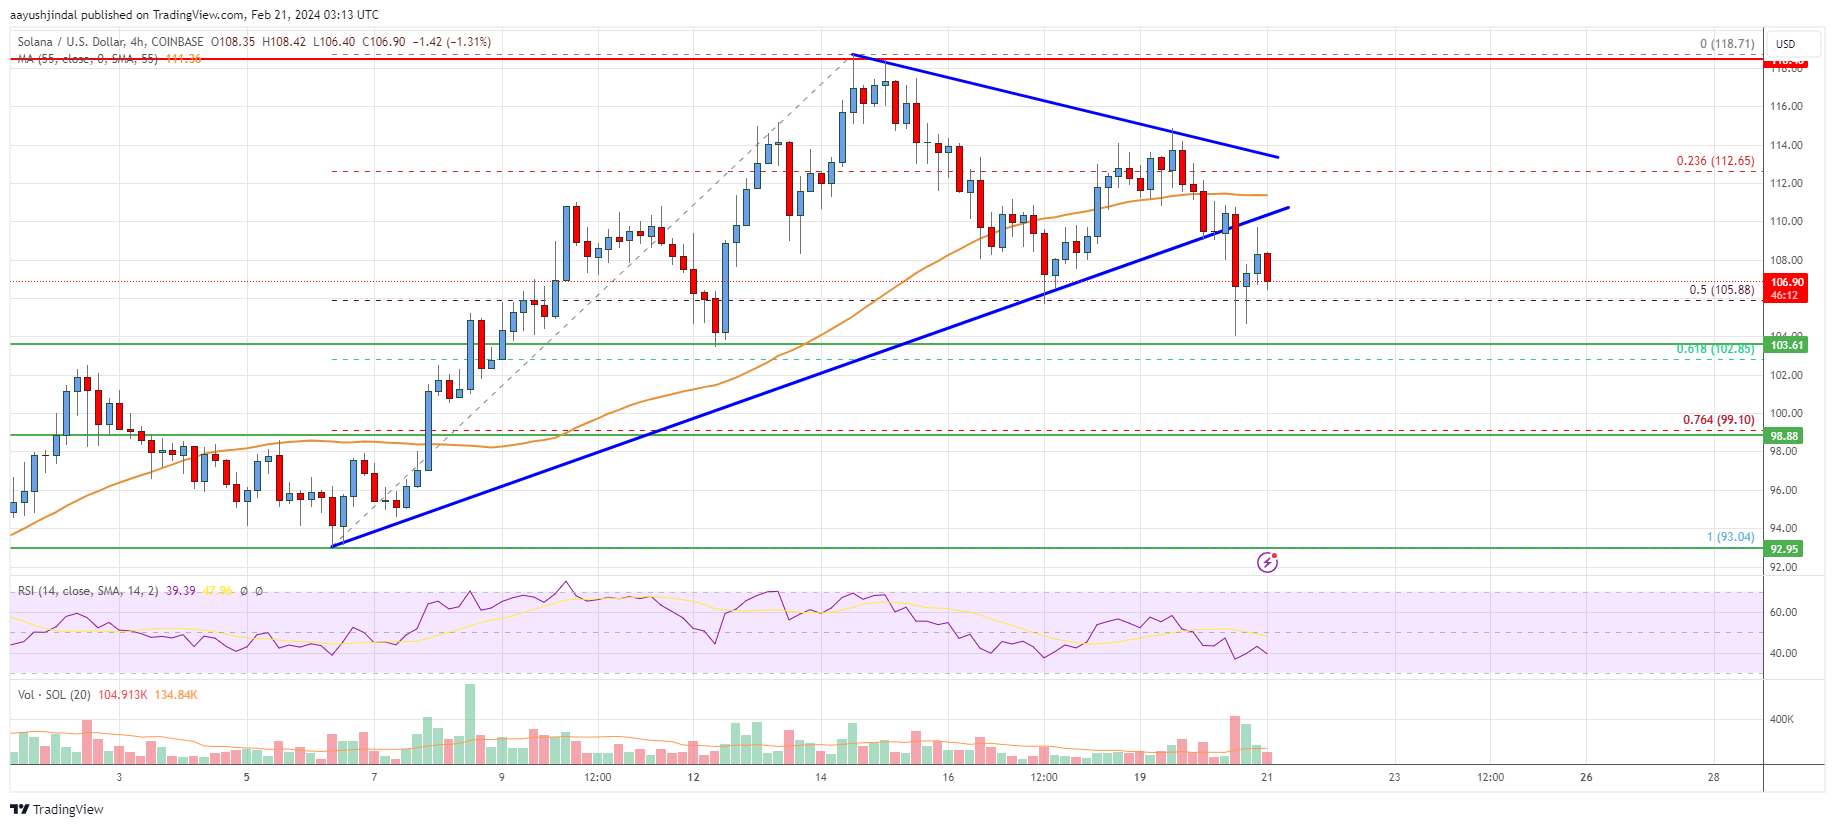 Solana (SOL) Price Analysis: Bulls Struggle To Protect Key Support